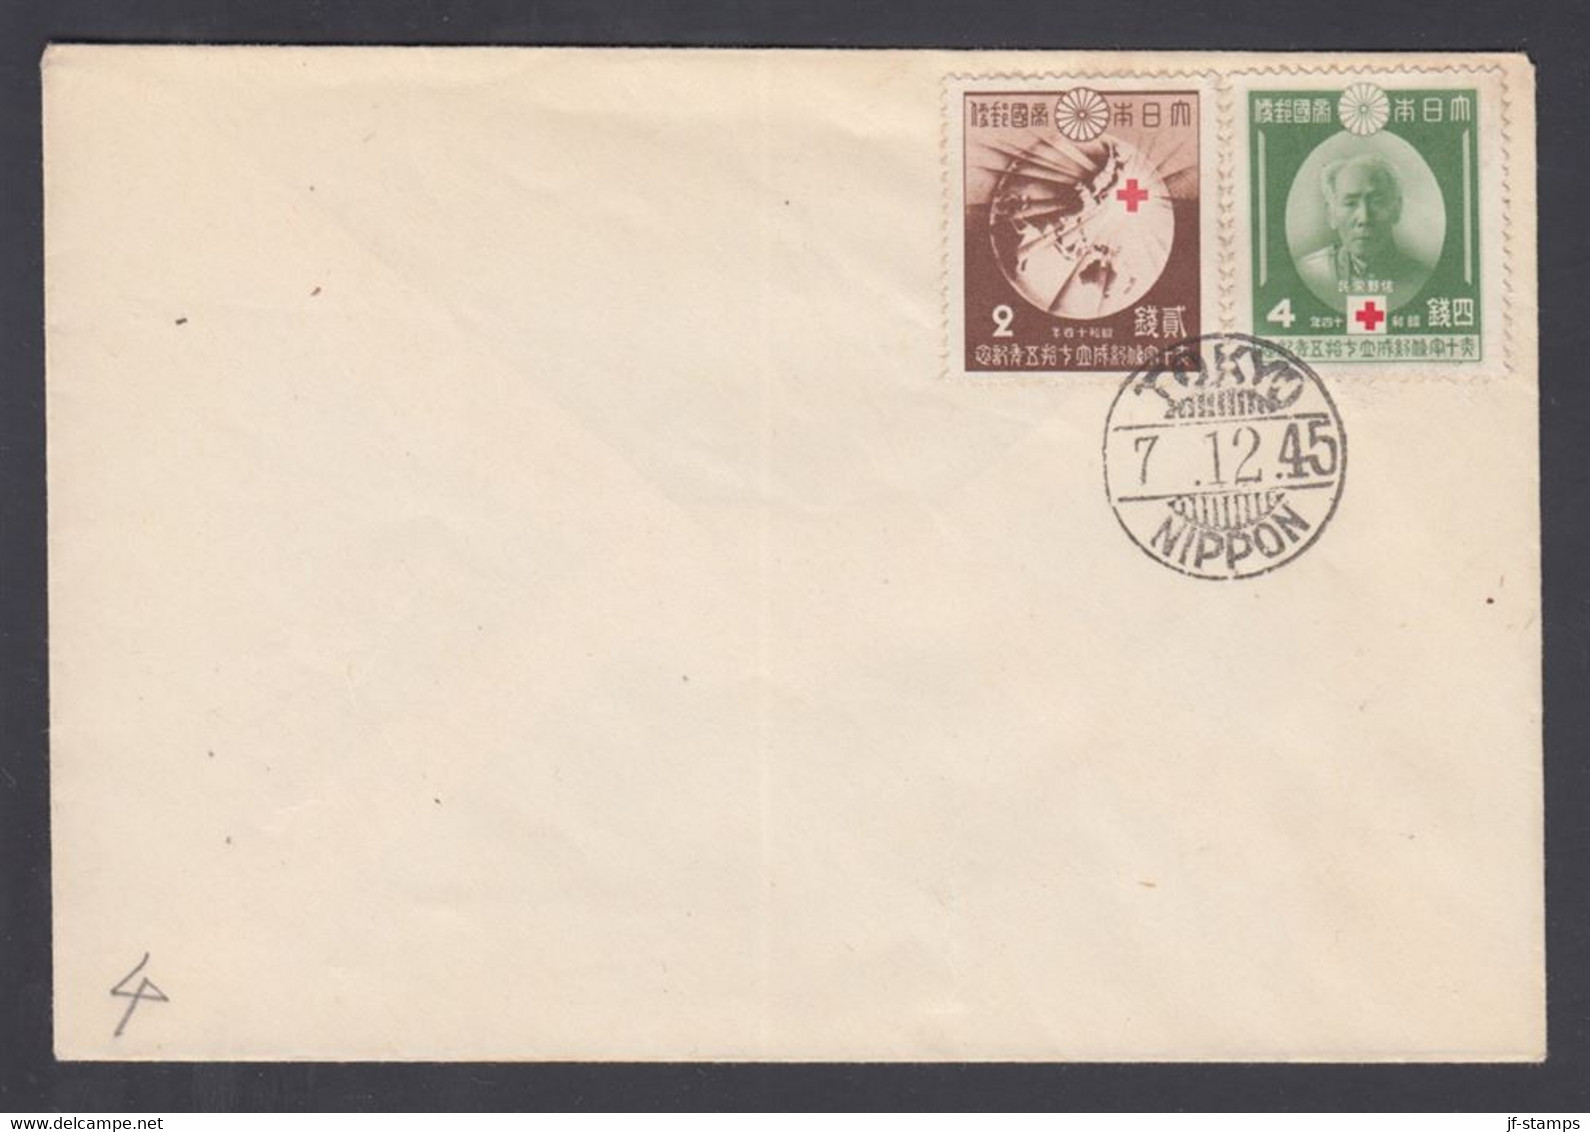 1945. JAPAN  12 + 4 RED CROSS Cancelled TOKIO NIPPON 7.12.45. (Michel 284-285) - JF367904 - Covers & Documents